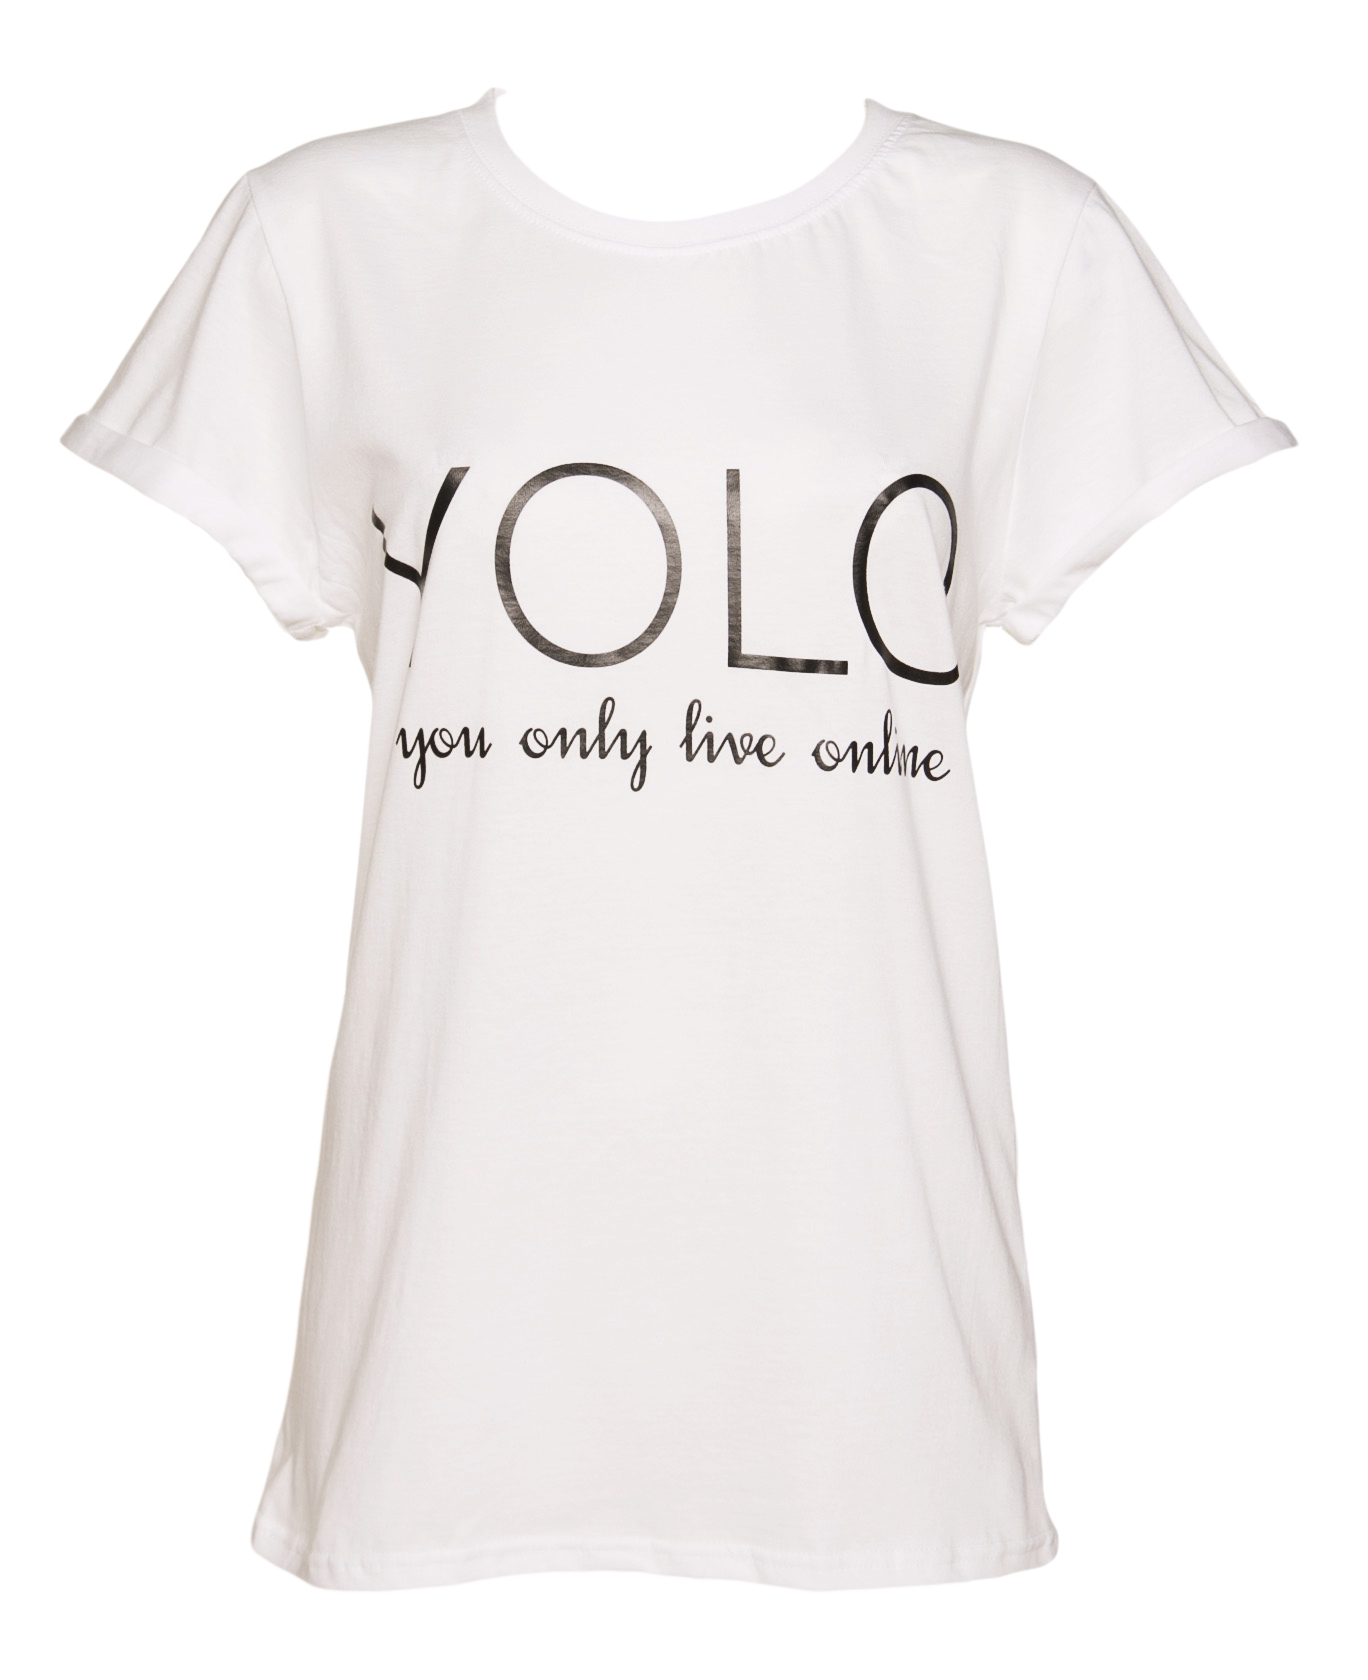 Local Heroes Ladies YOLO You Only Live Online T-Shirt